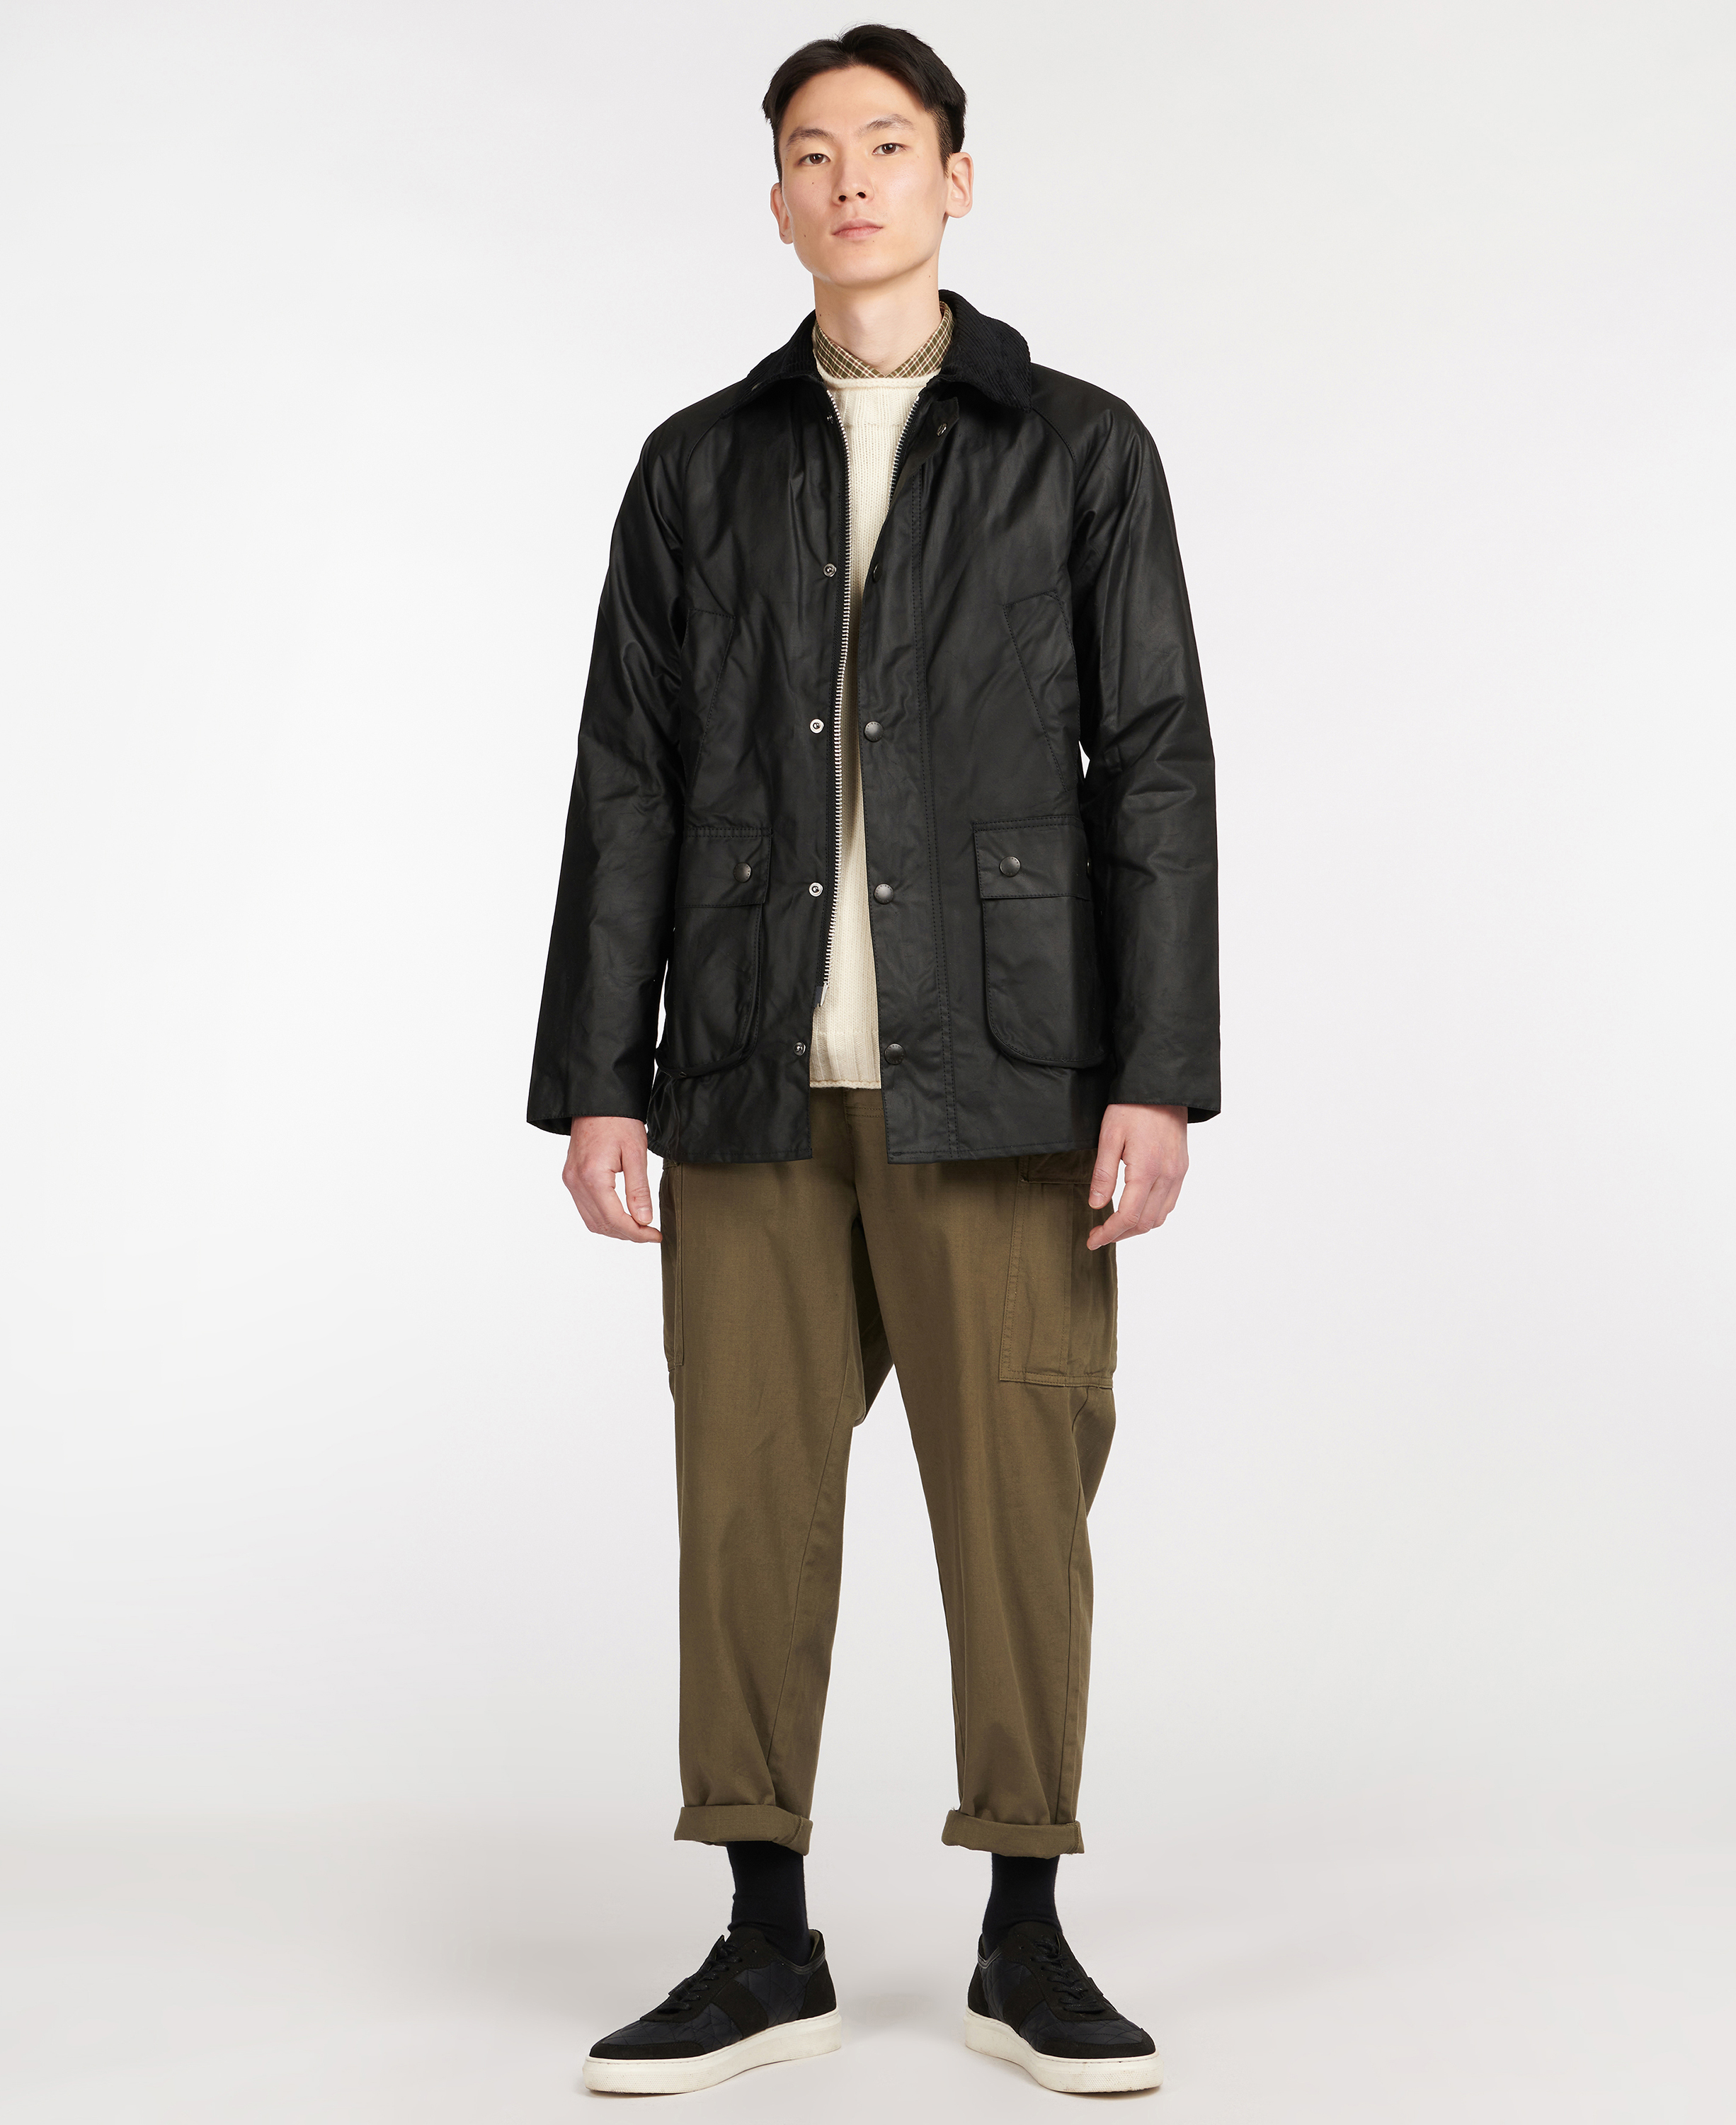 Barbour SL Bedale Waxed Cotton Jacket in Black | Barbour